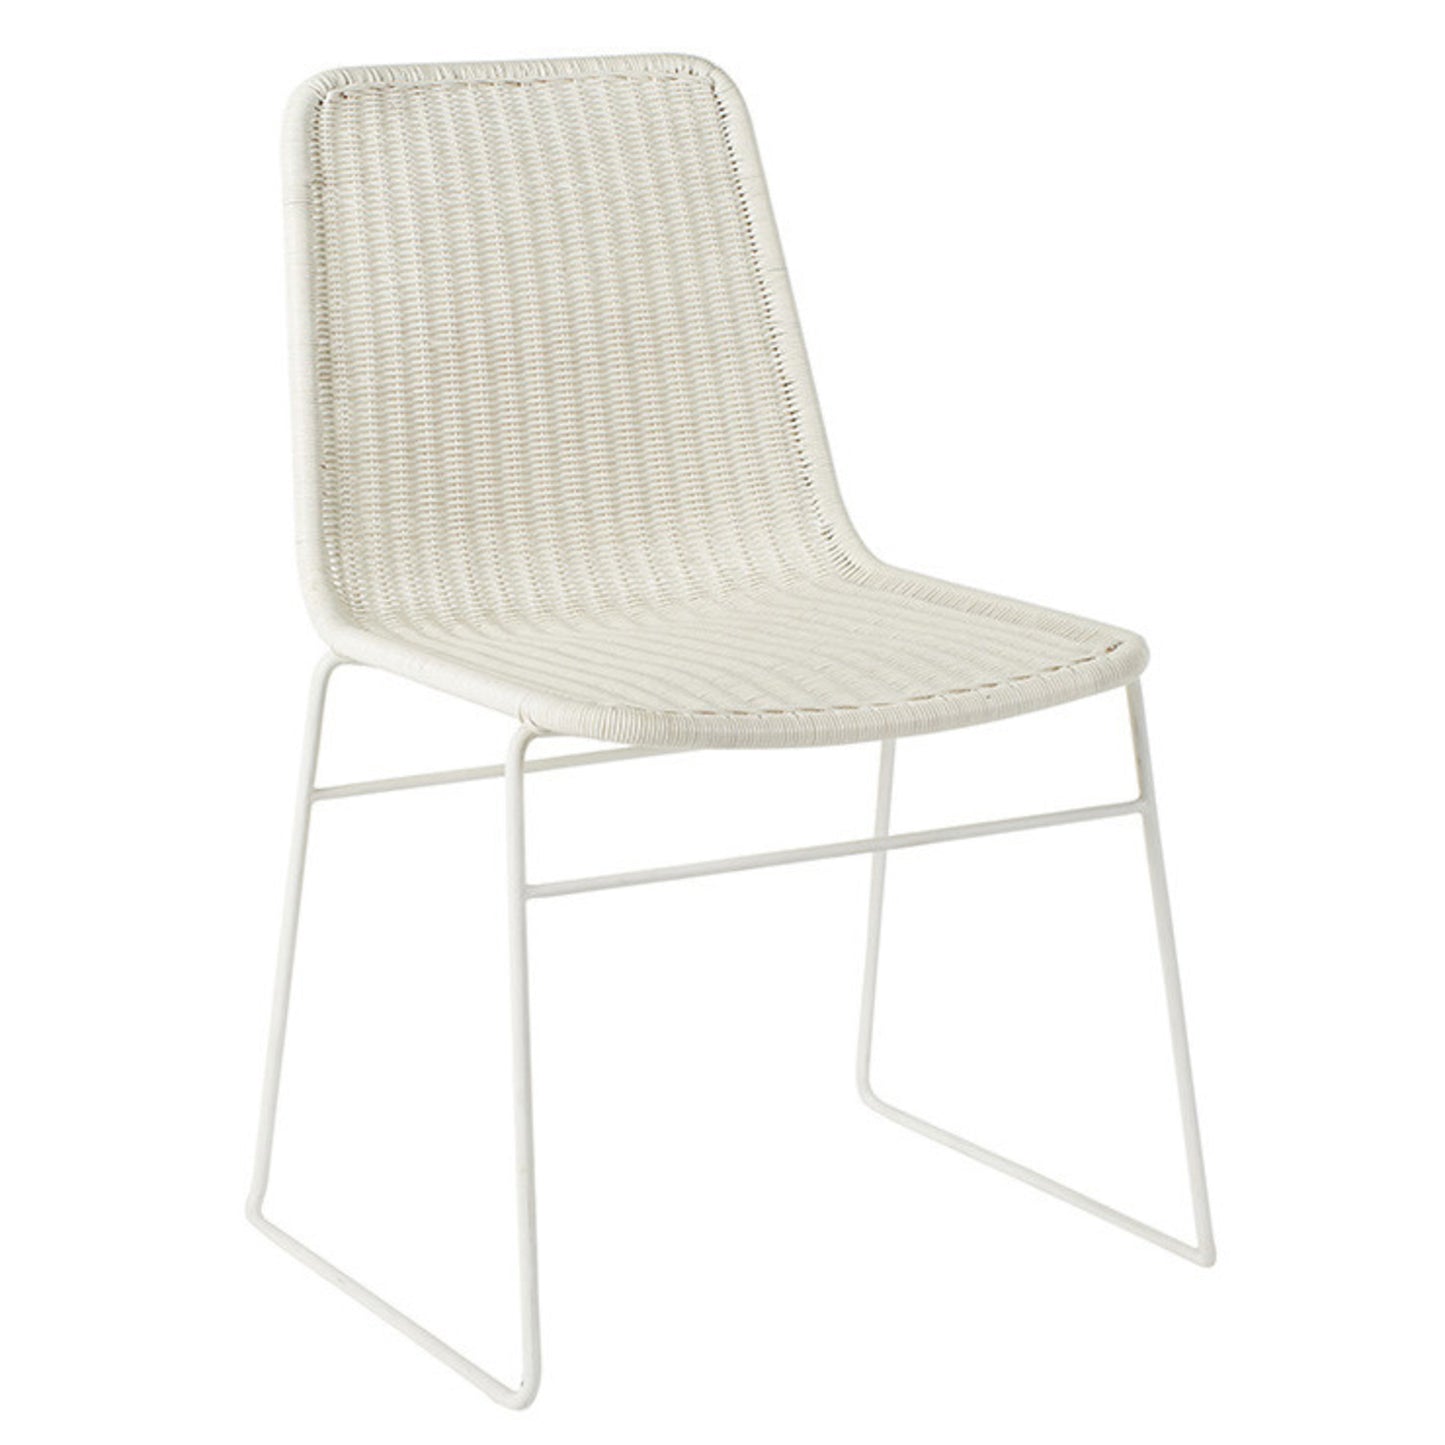 Olivia Dining Chair - White